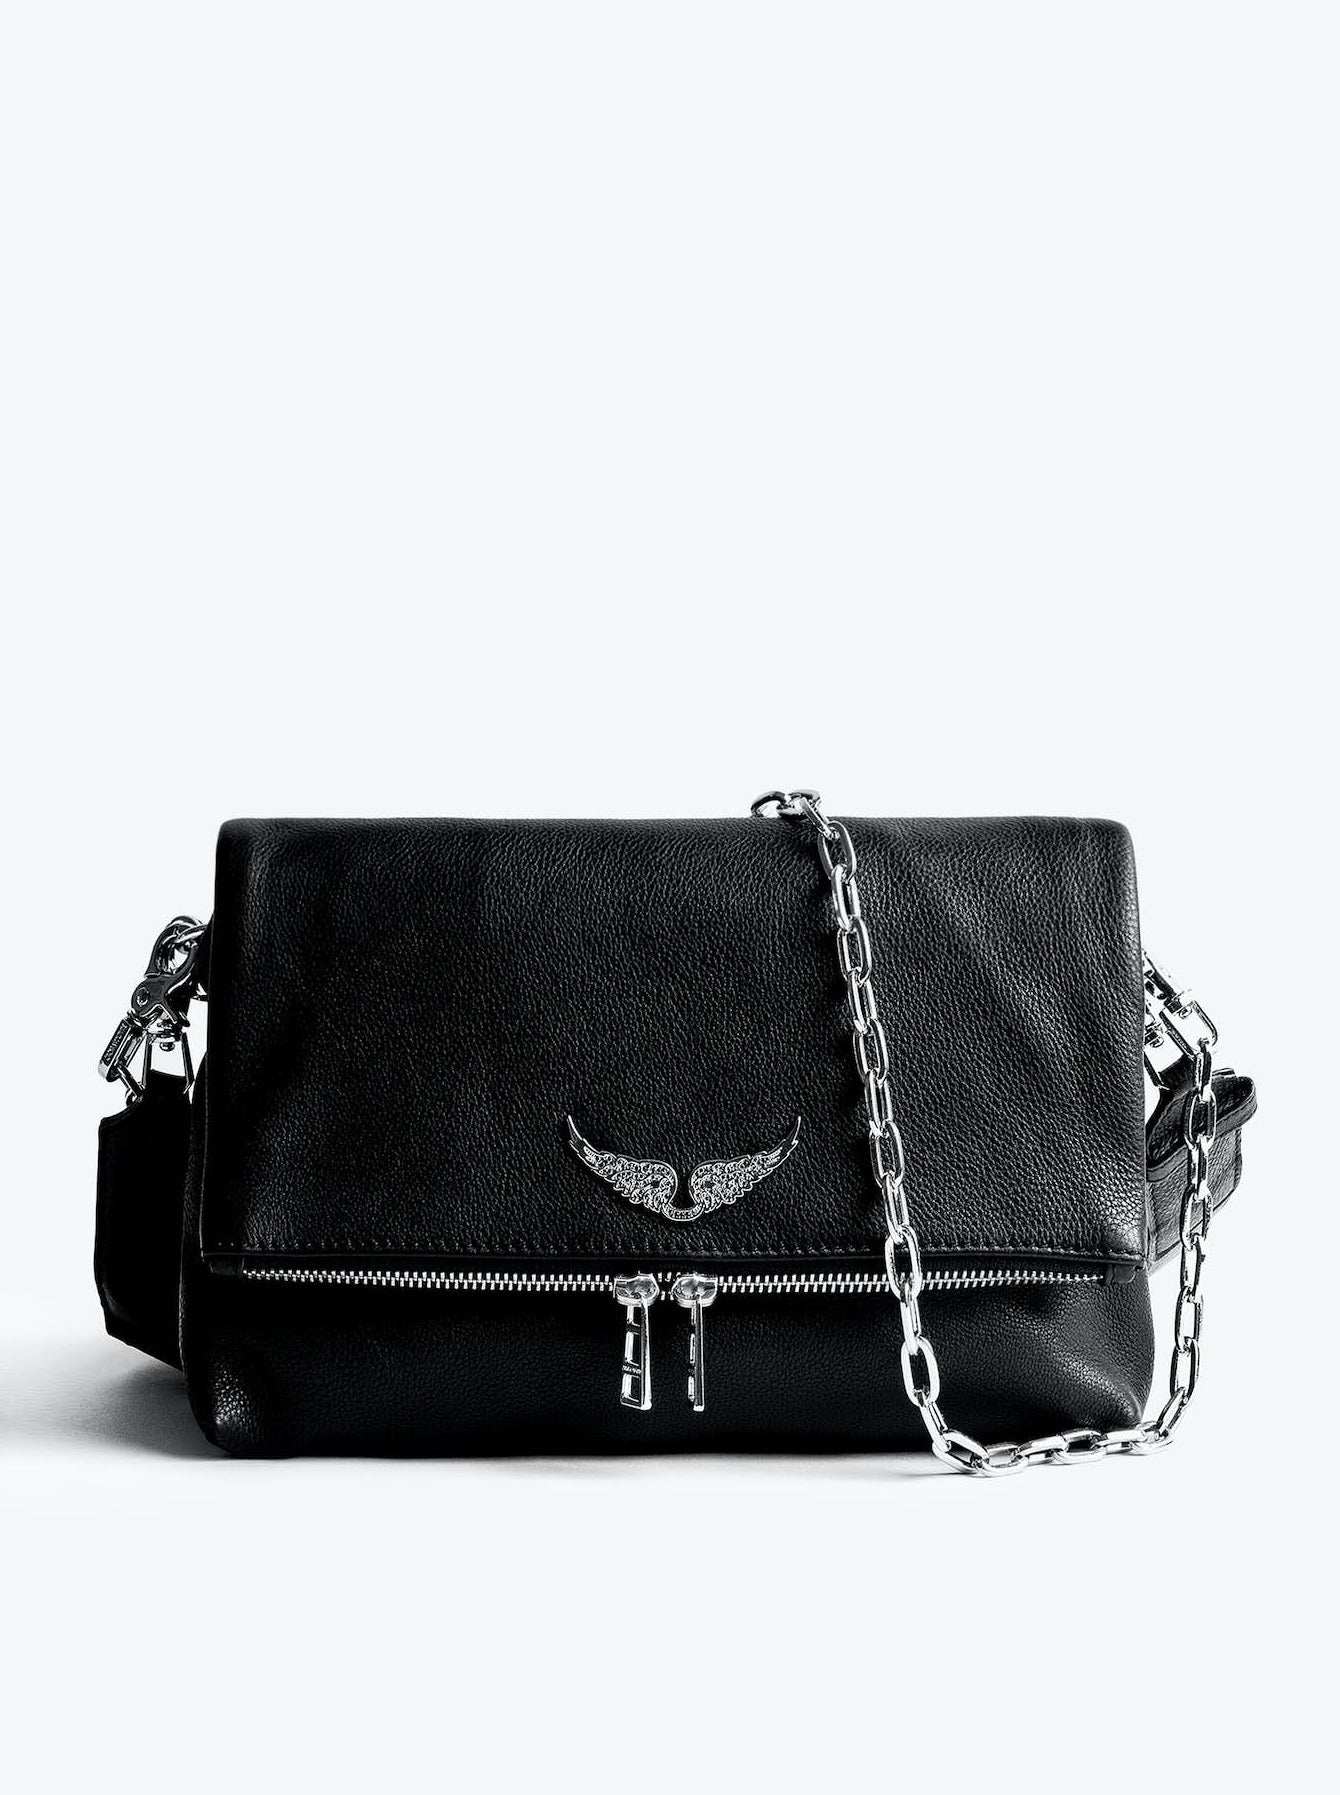 Rocky grained leather bag, black-silver